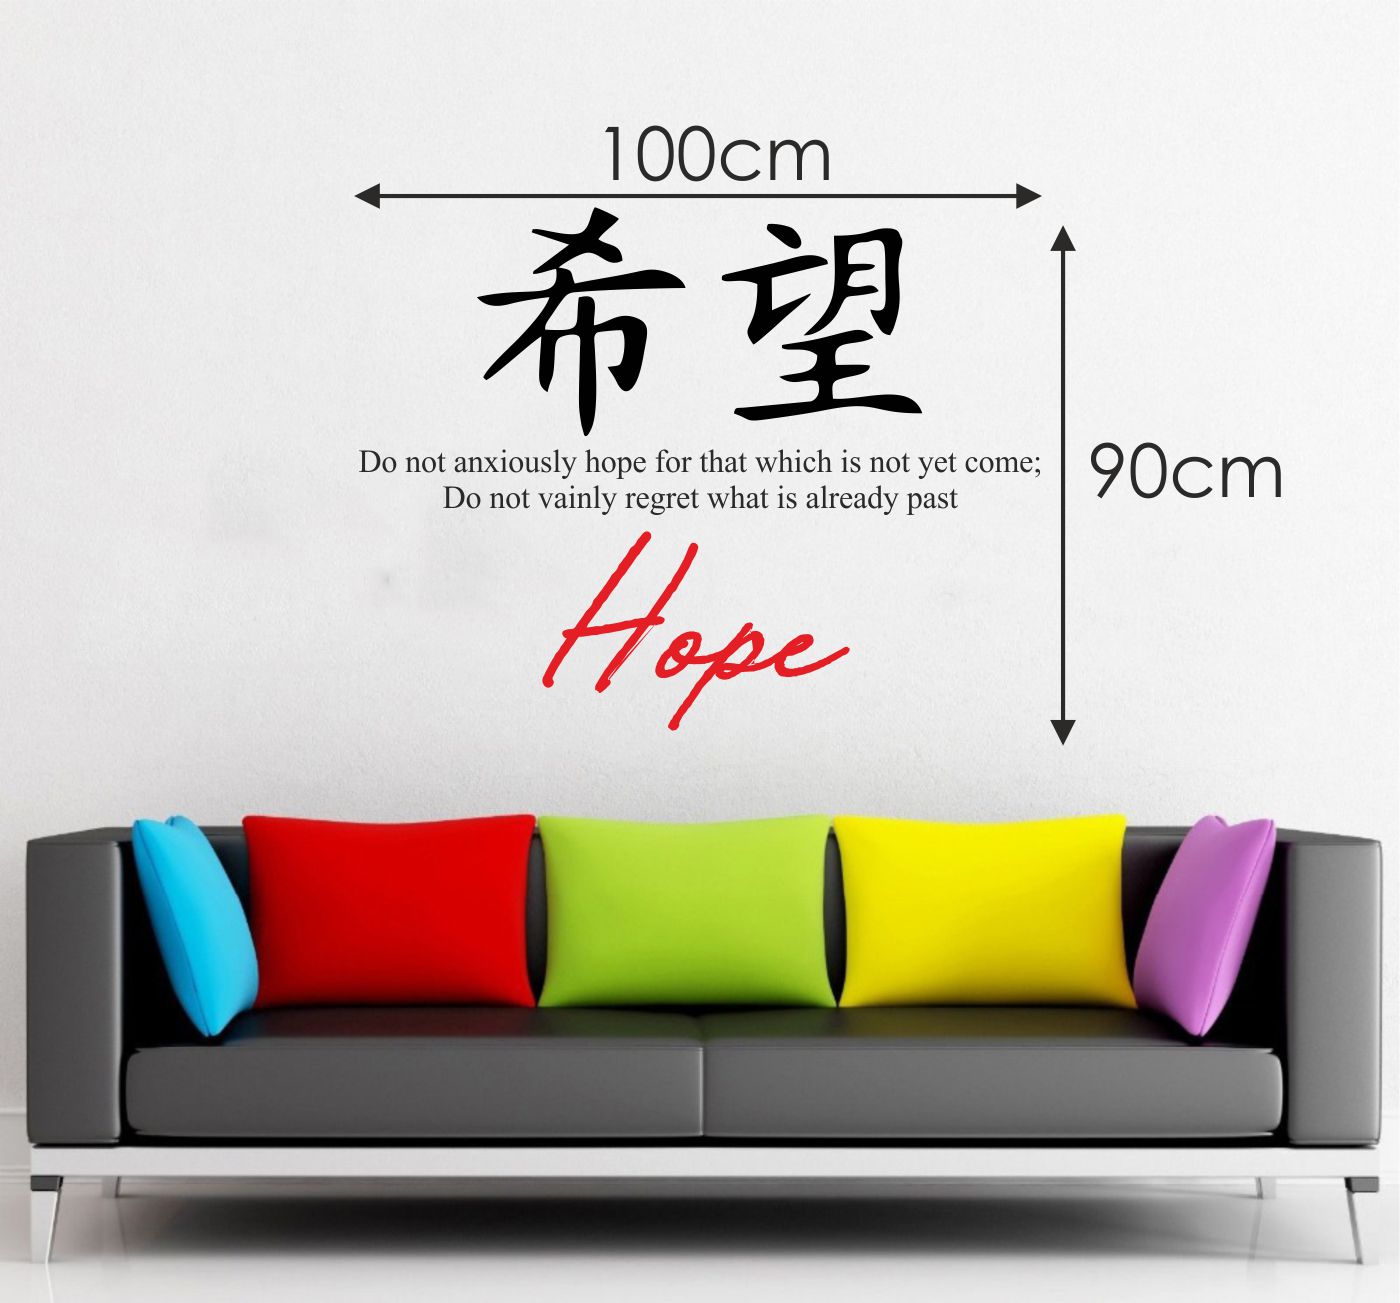 ORKA Chinese Wall Decal Sticker 9   XXL 